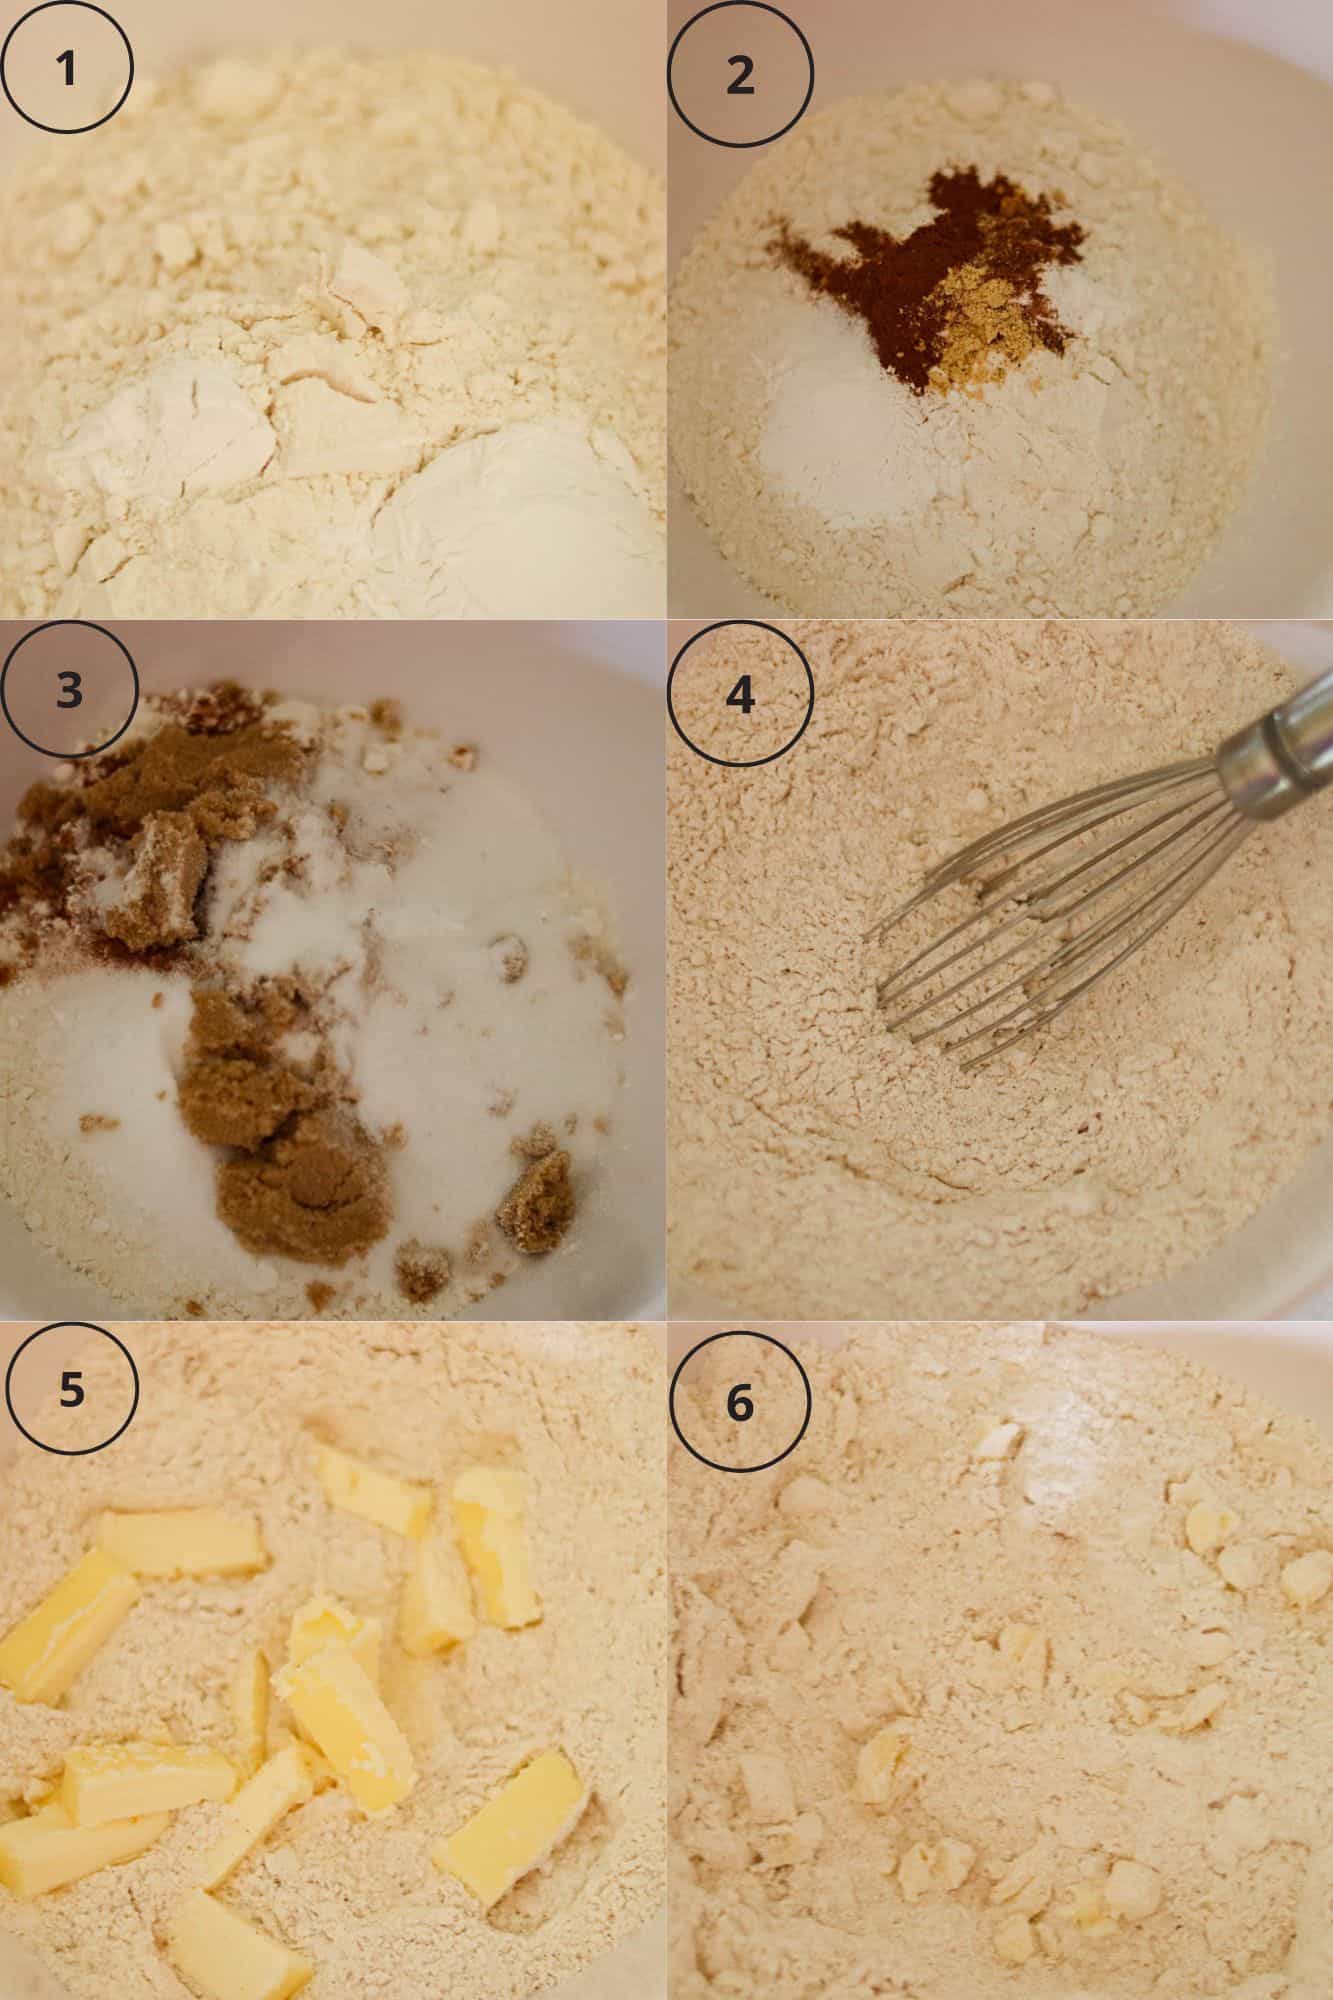 photos showing how to combine the dry scone ingredients.